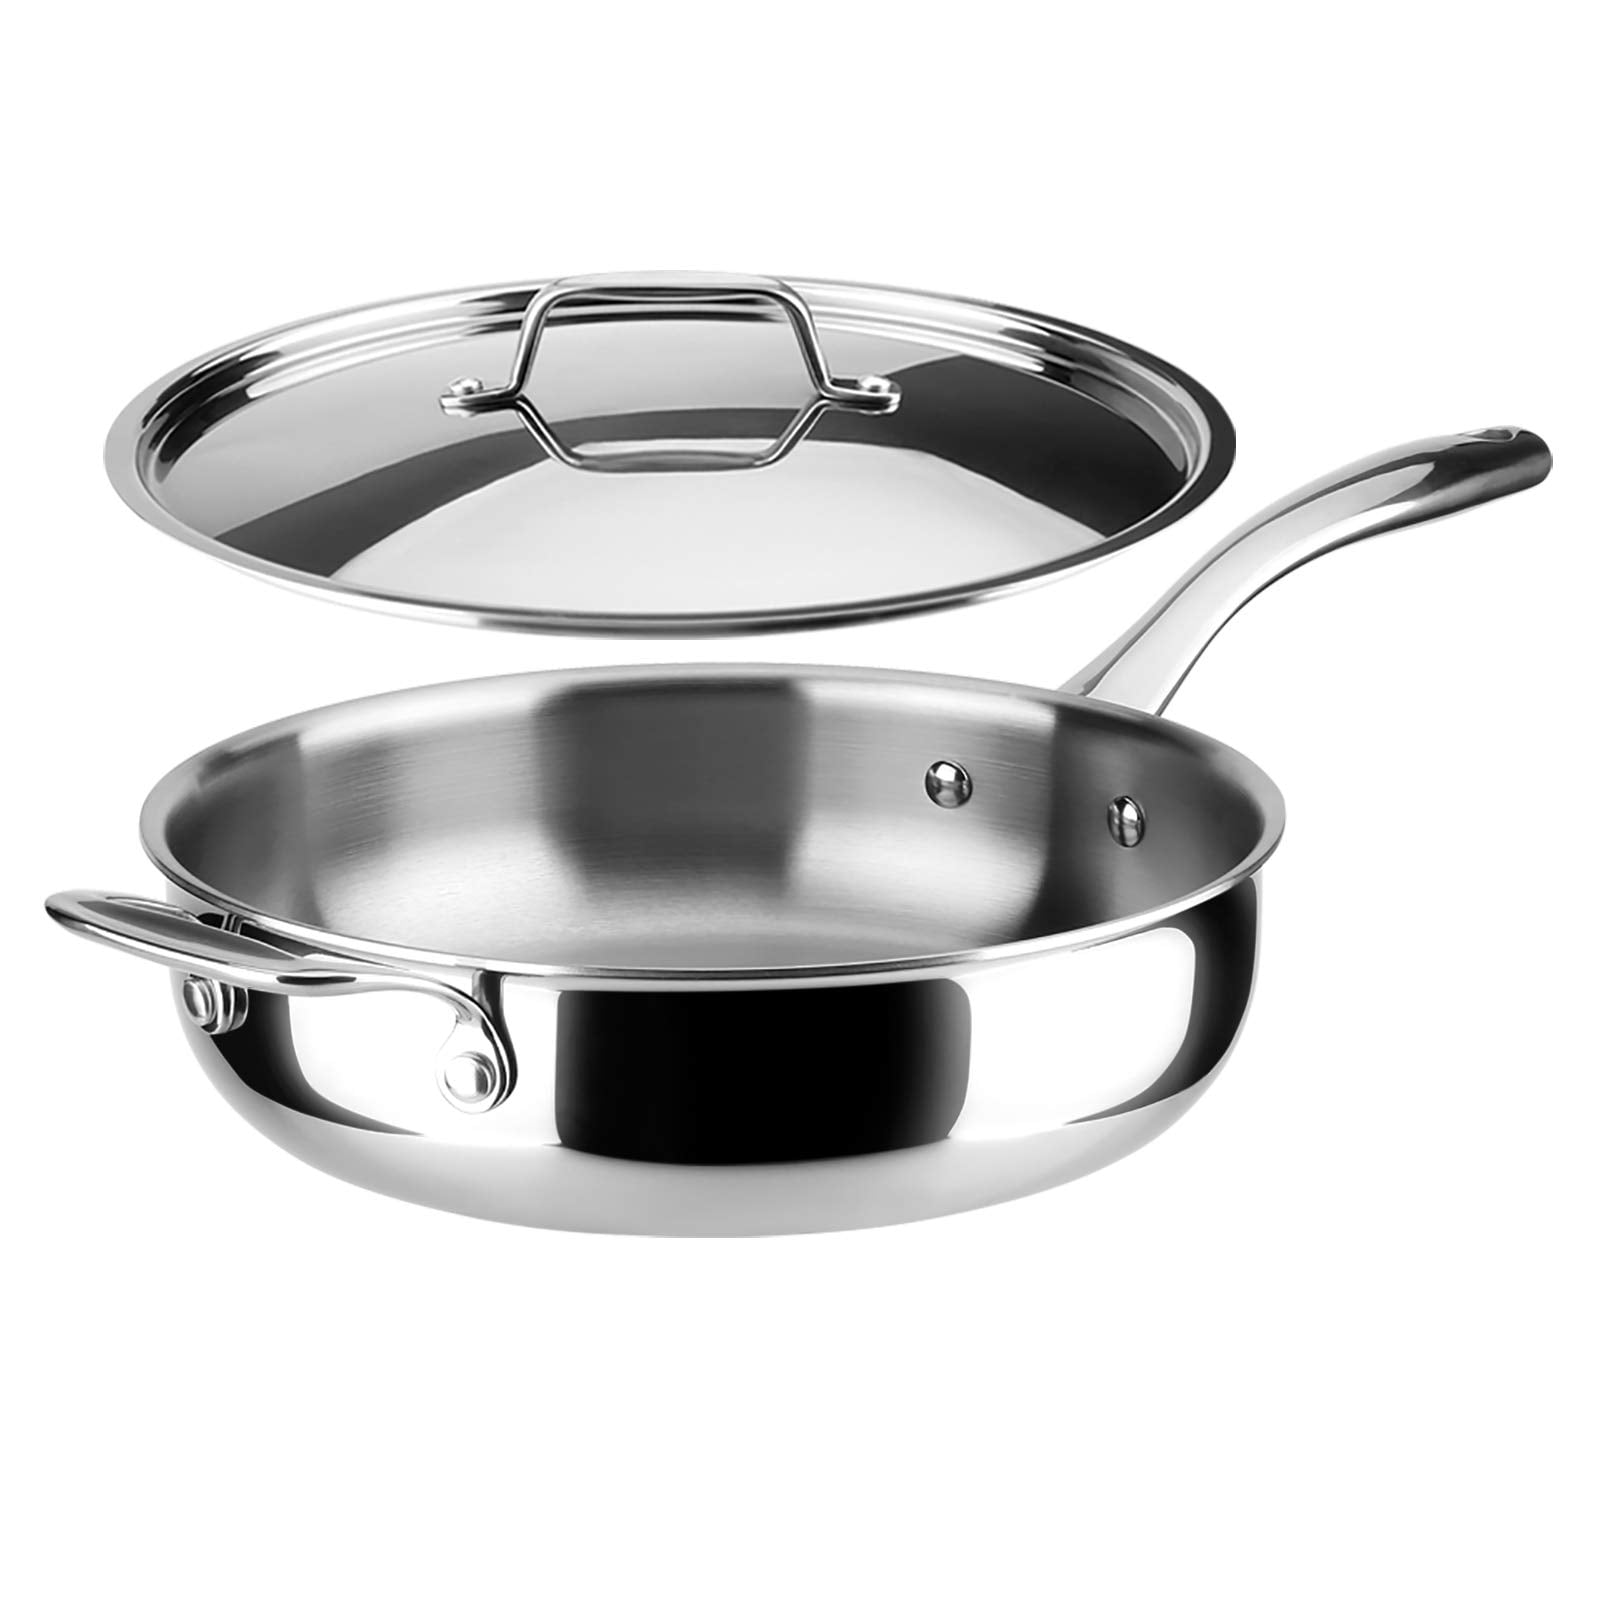 3.Clad Fry pan Ceramic Coated Tri-ply Polished (11 In.) – Chantal